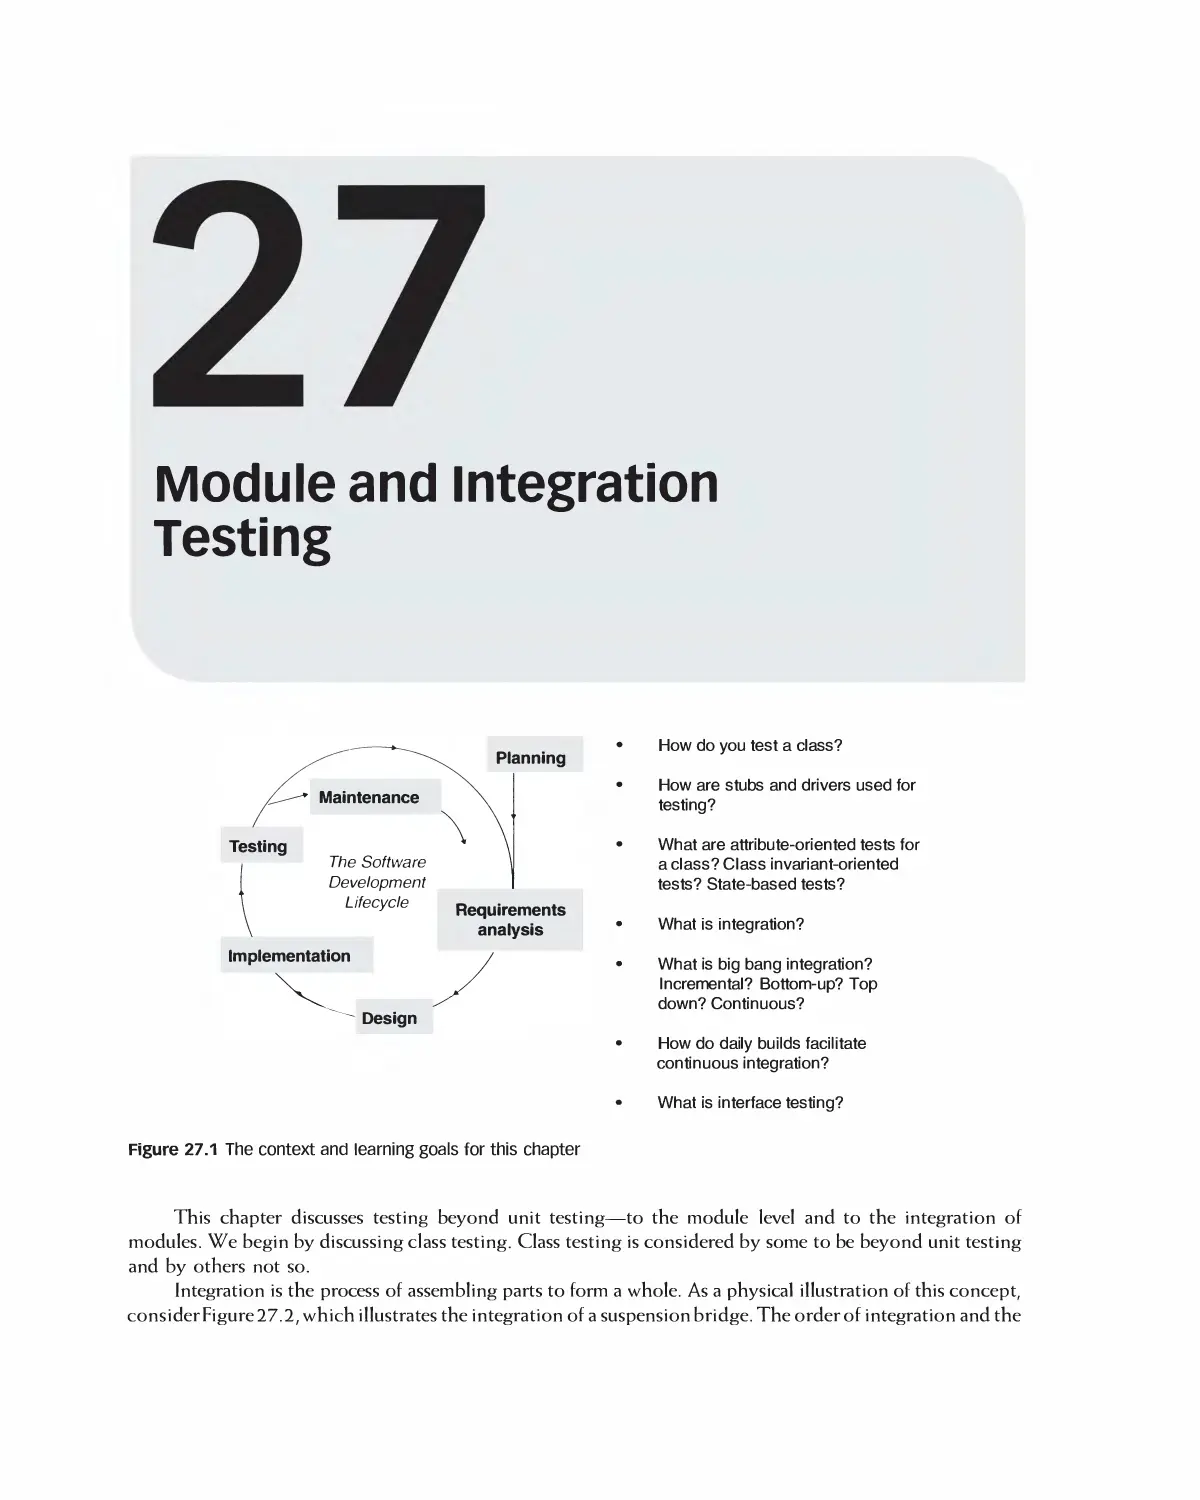 Chapter 27: Module and Integration Testing